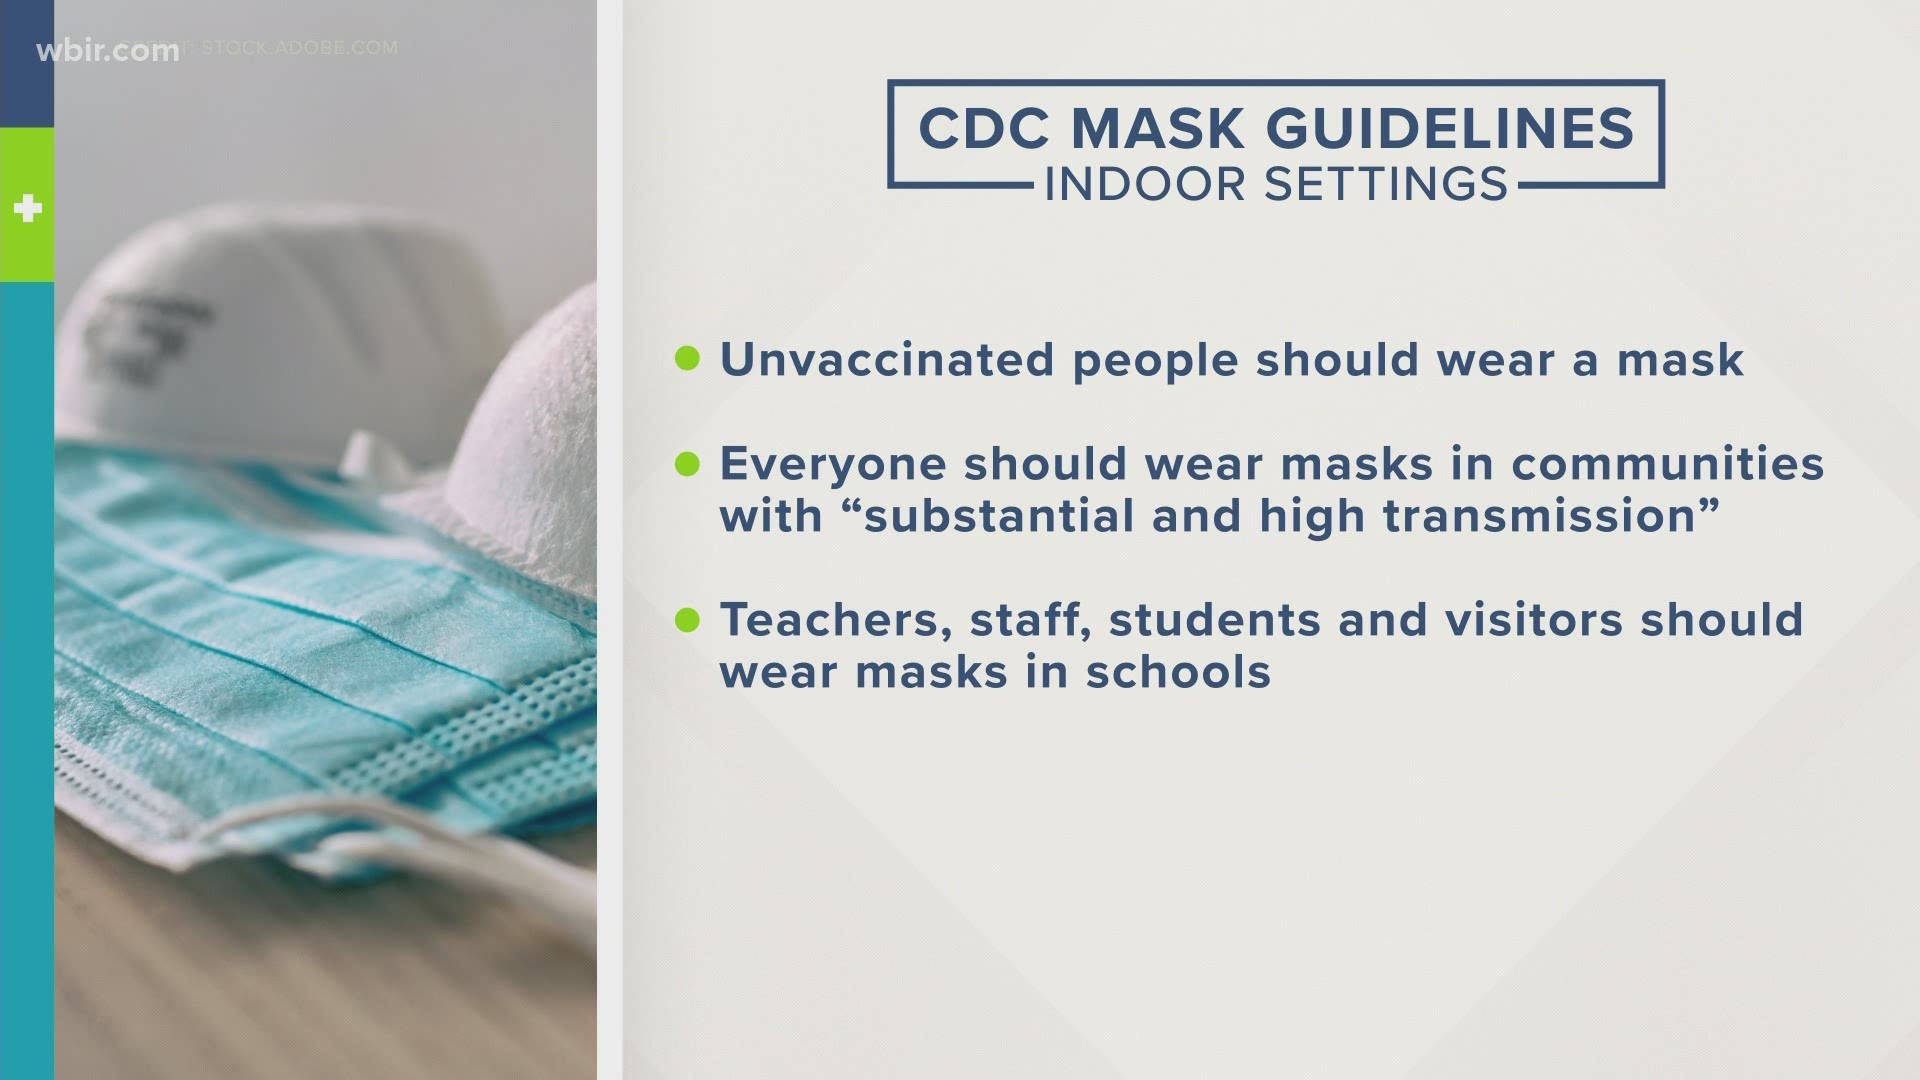 Experts also said that masks were recommended in schools, regardless of whether students or teachers were vaccinated.